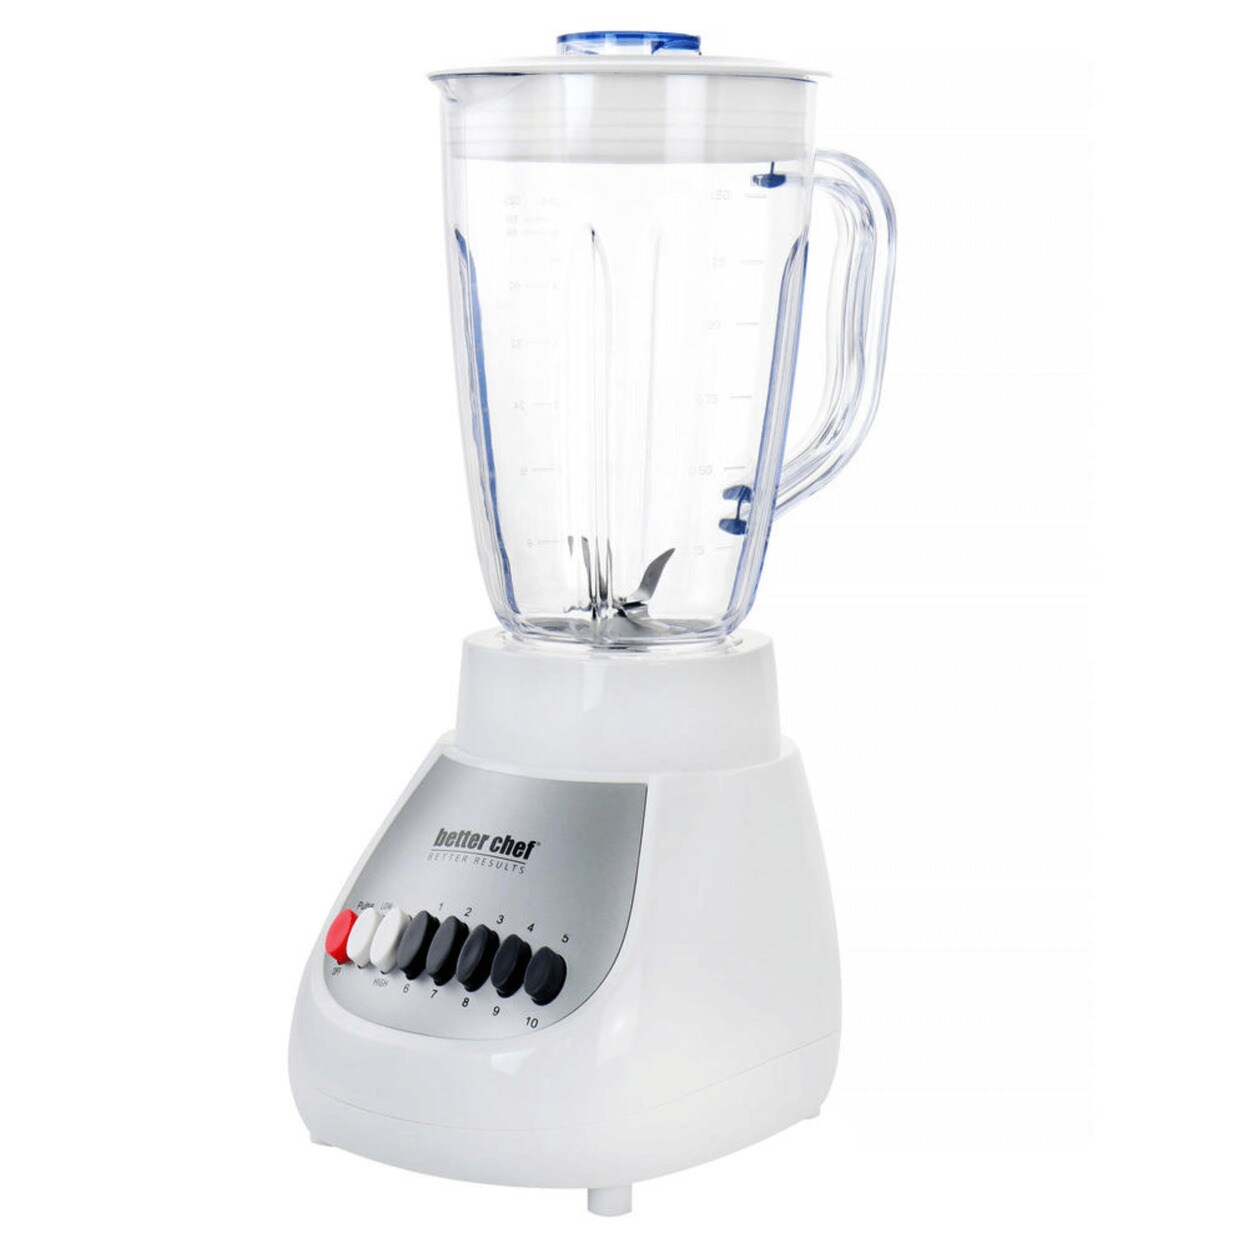 Better Chef   Classic 10-Speed 6-Cup Plastic Jar Blender